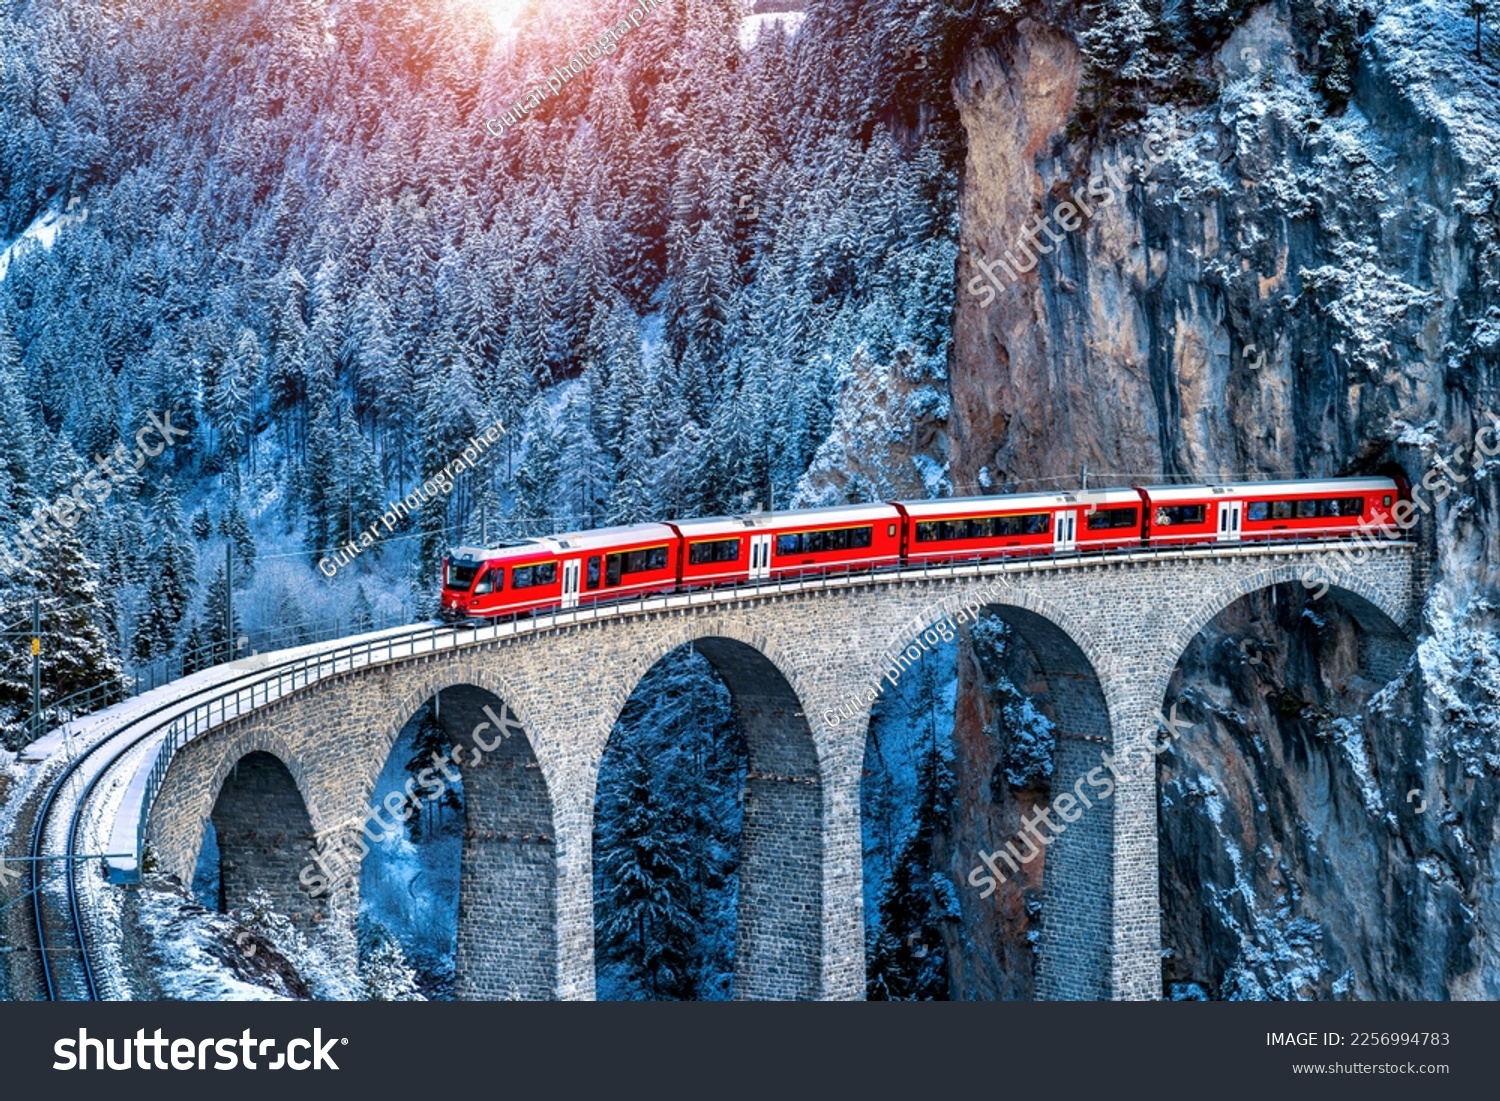 Aerial view of Train passing through famous mountain in Filisur, Switzerland.   train express in Swiss Alps snow winter scenery.  #2256994783